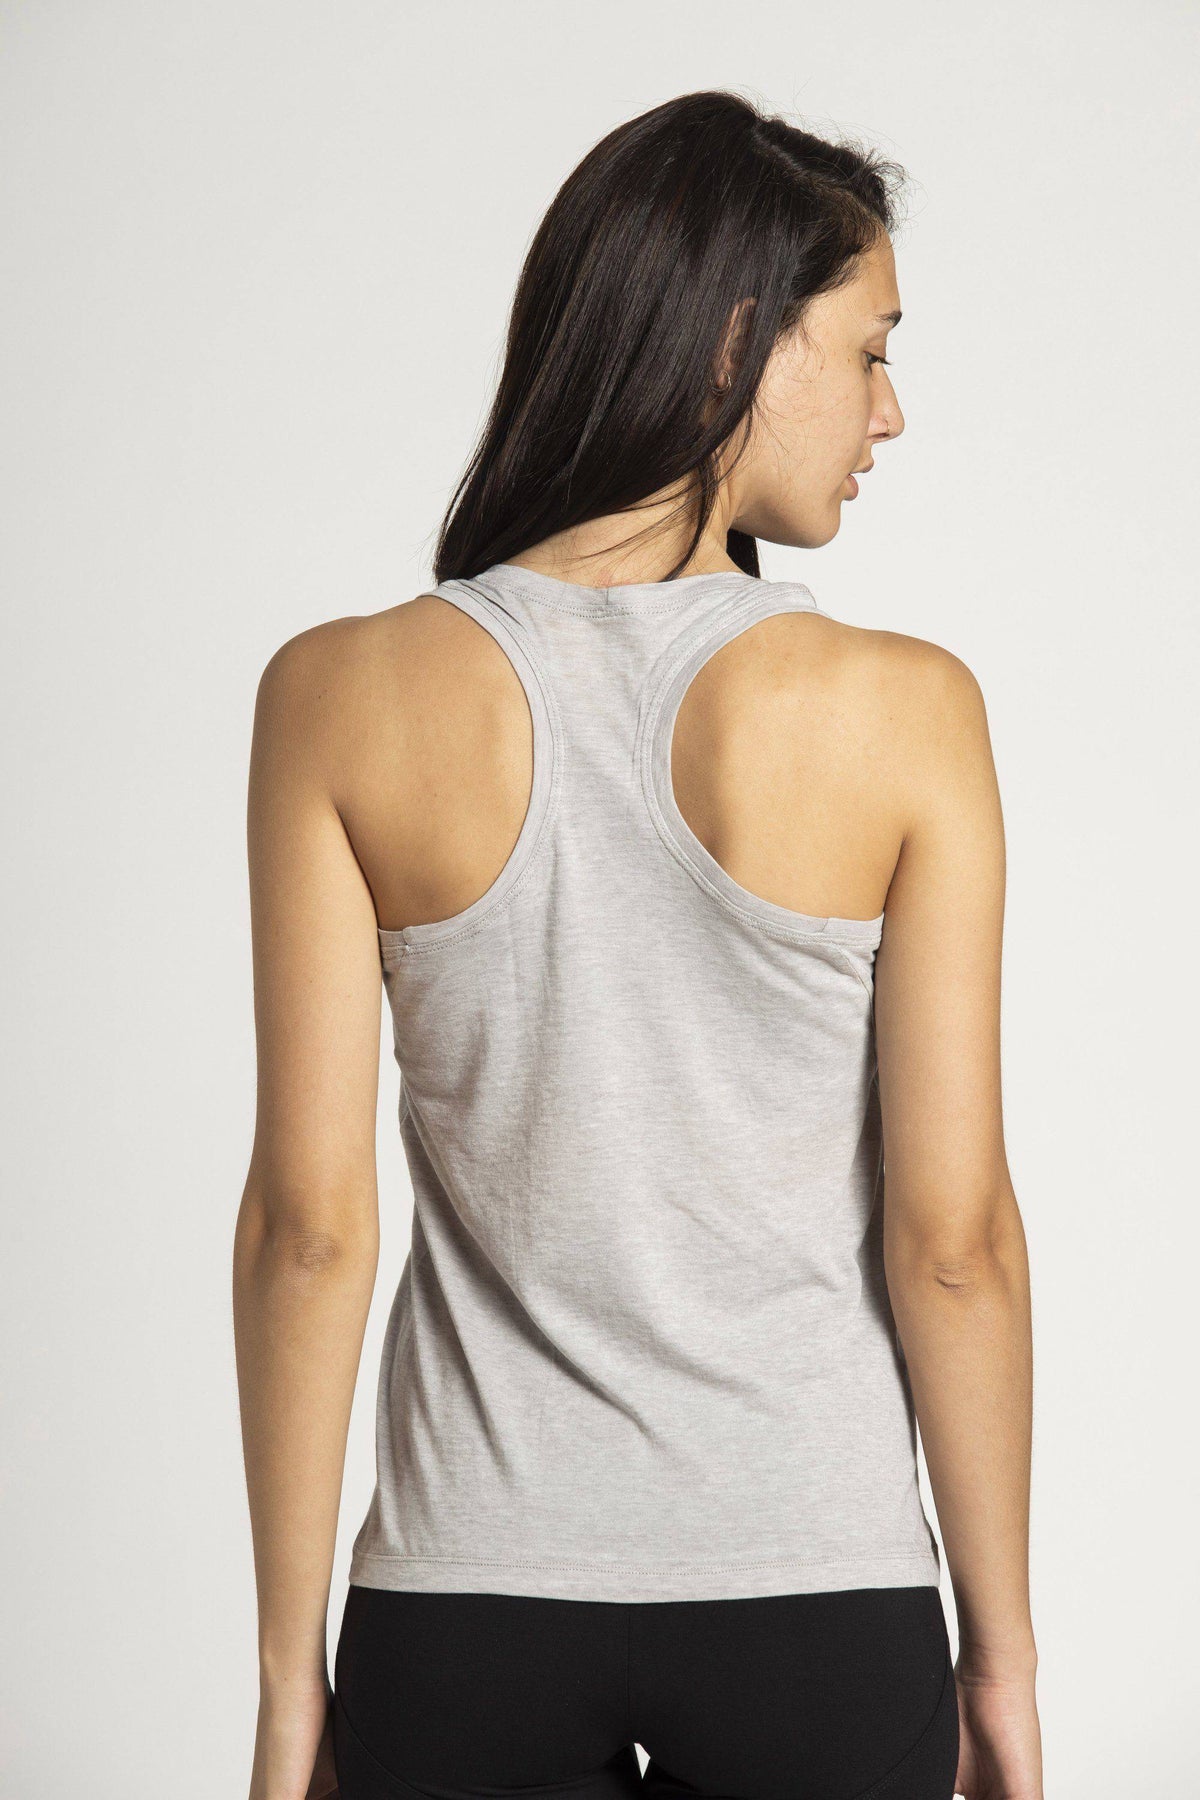 OUTLET Tank Top - womens clothing - Ripple Yoga Wear